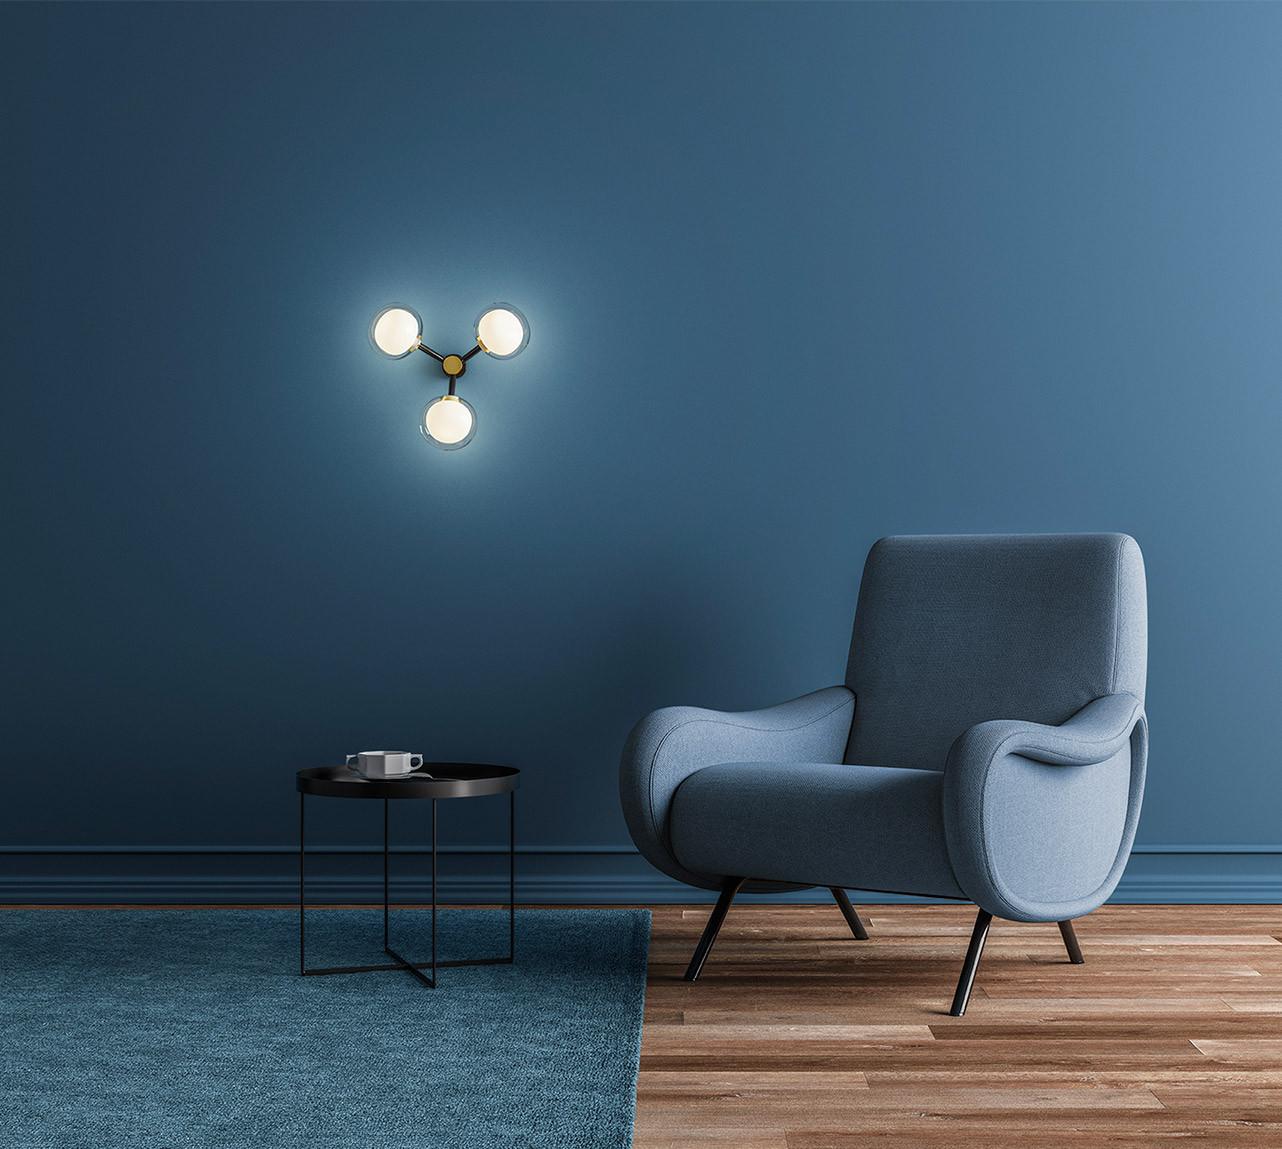 Wall Lamp Nabila 552.73 by Corrado Dotti x TOOY
3 lights
UL Listed 

Model shown:
Finish: Brass brushed
Color: Clear glass

Bulb compliance : 3 x G9 220/240V 3W Compliant with USA electric system

50s inspired collection of elegant and sophisticated